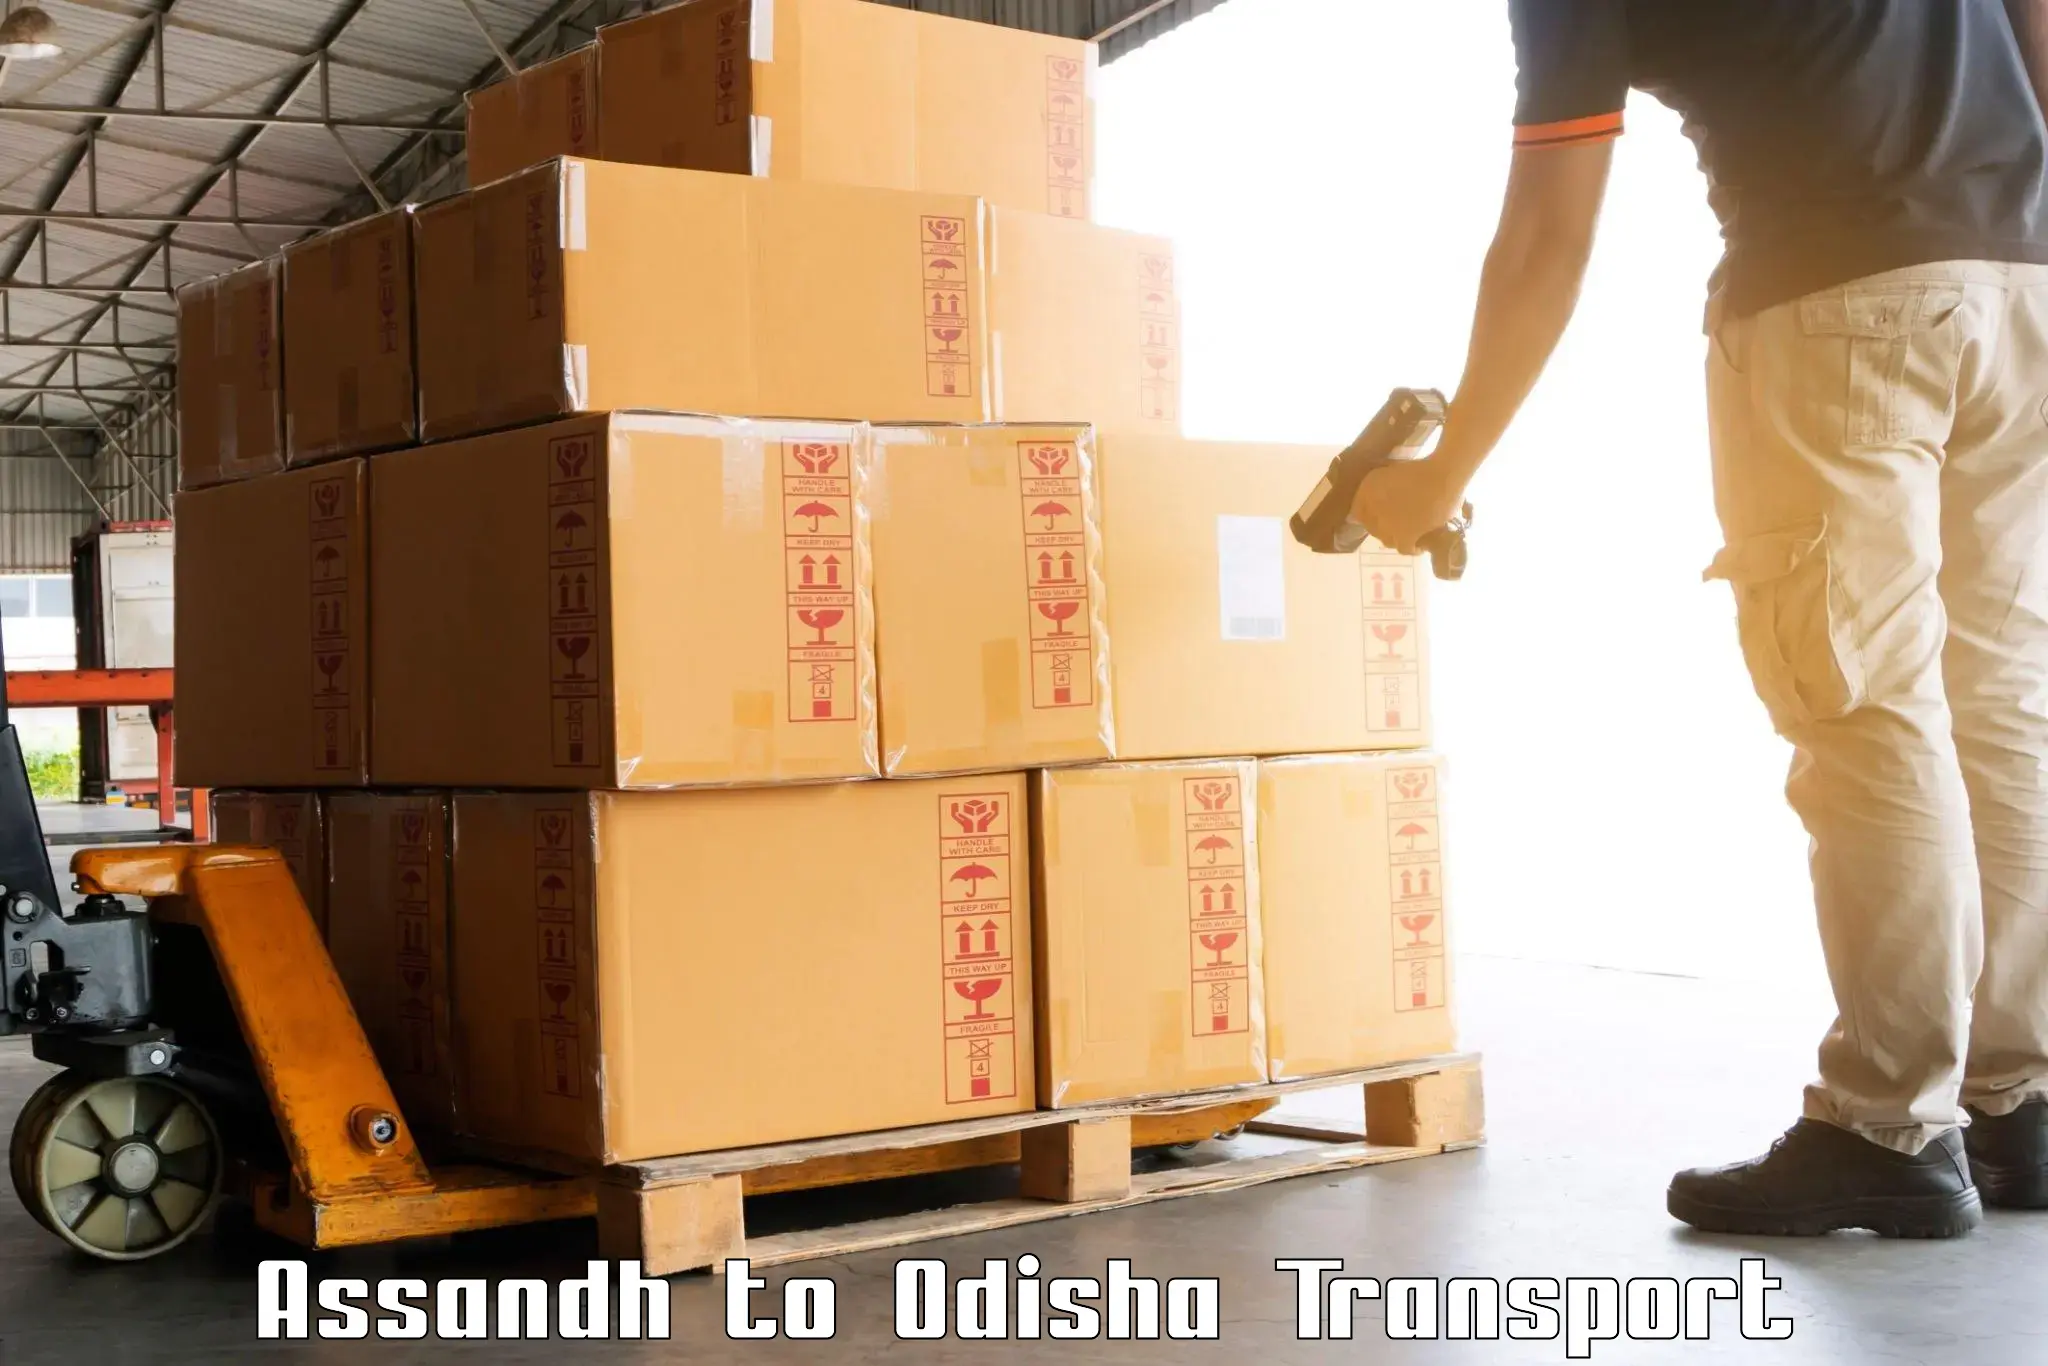 Best transport services in India Assandh to Jajpur